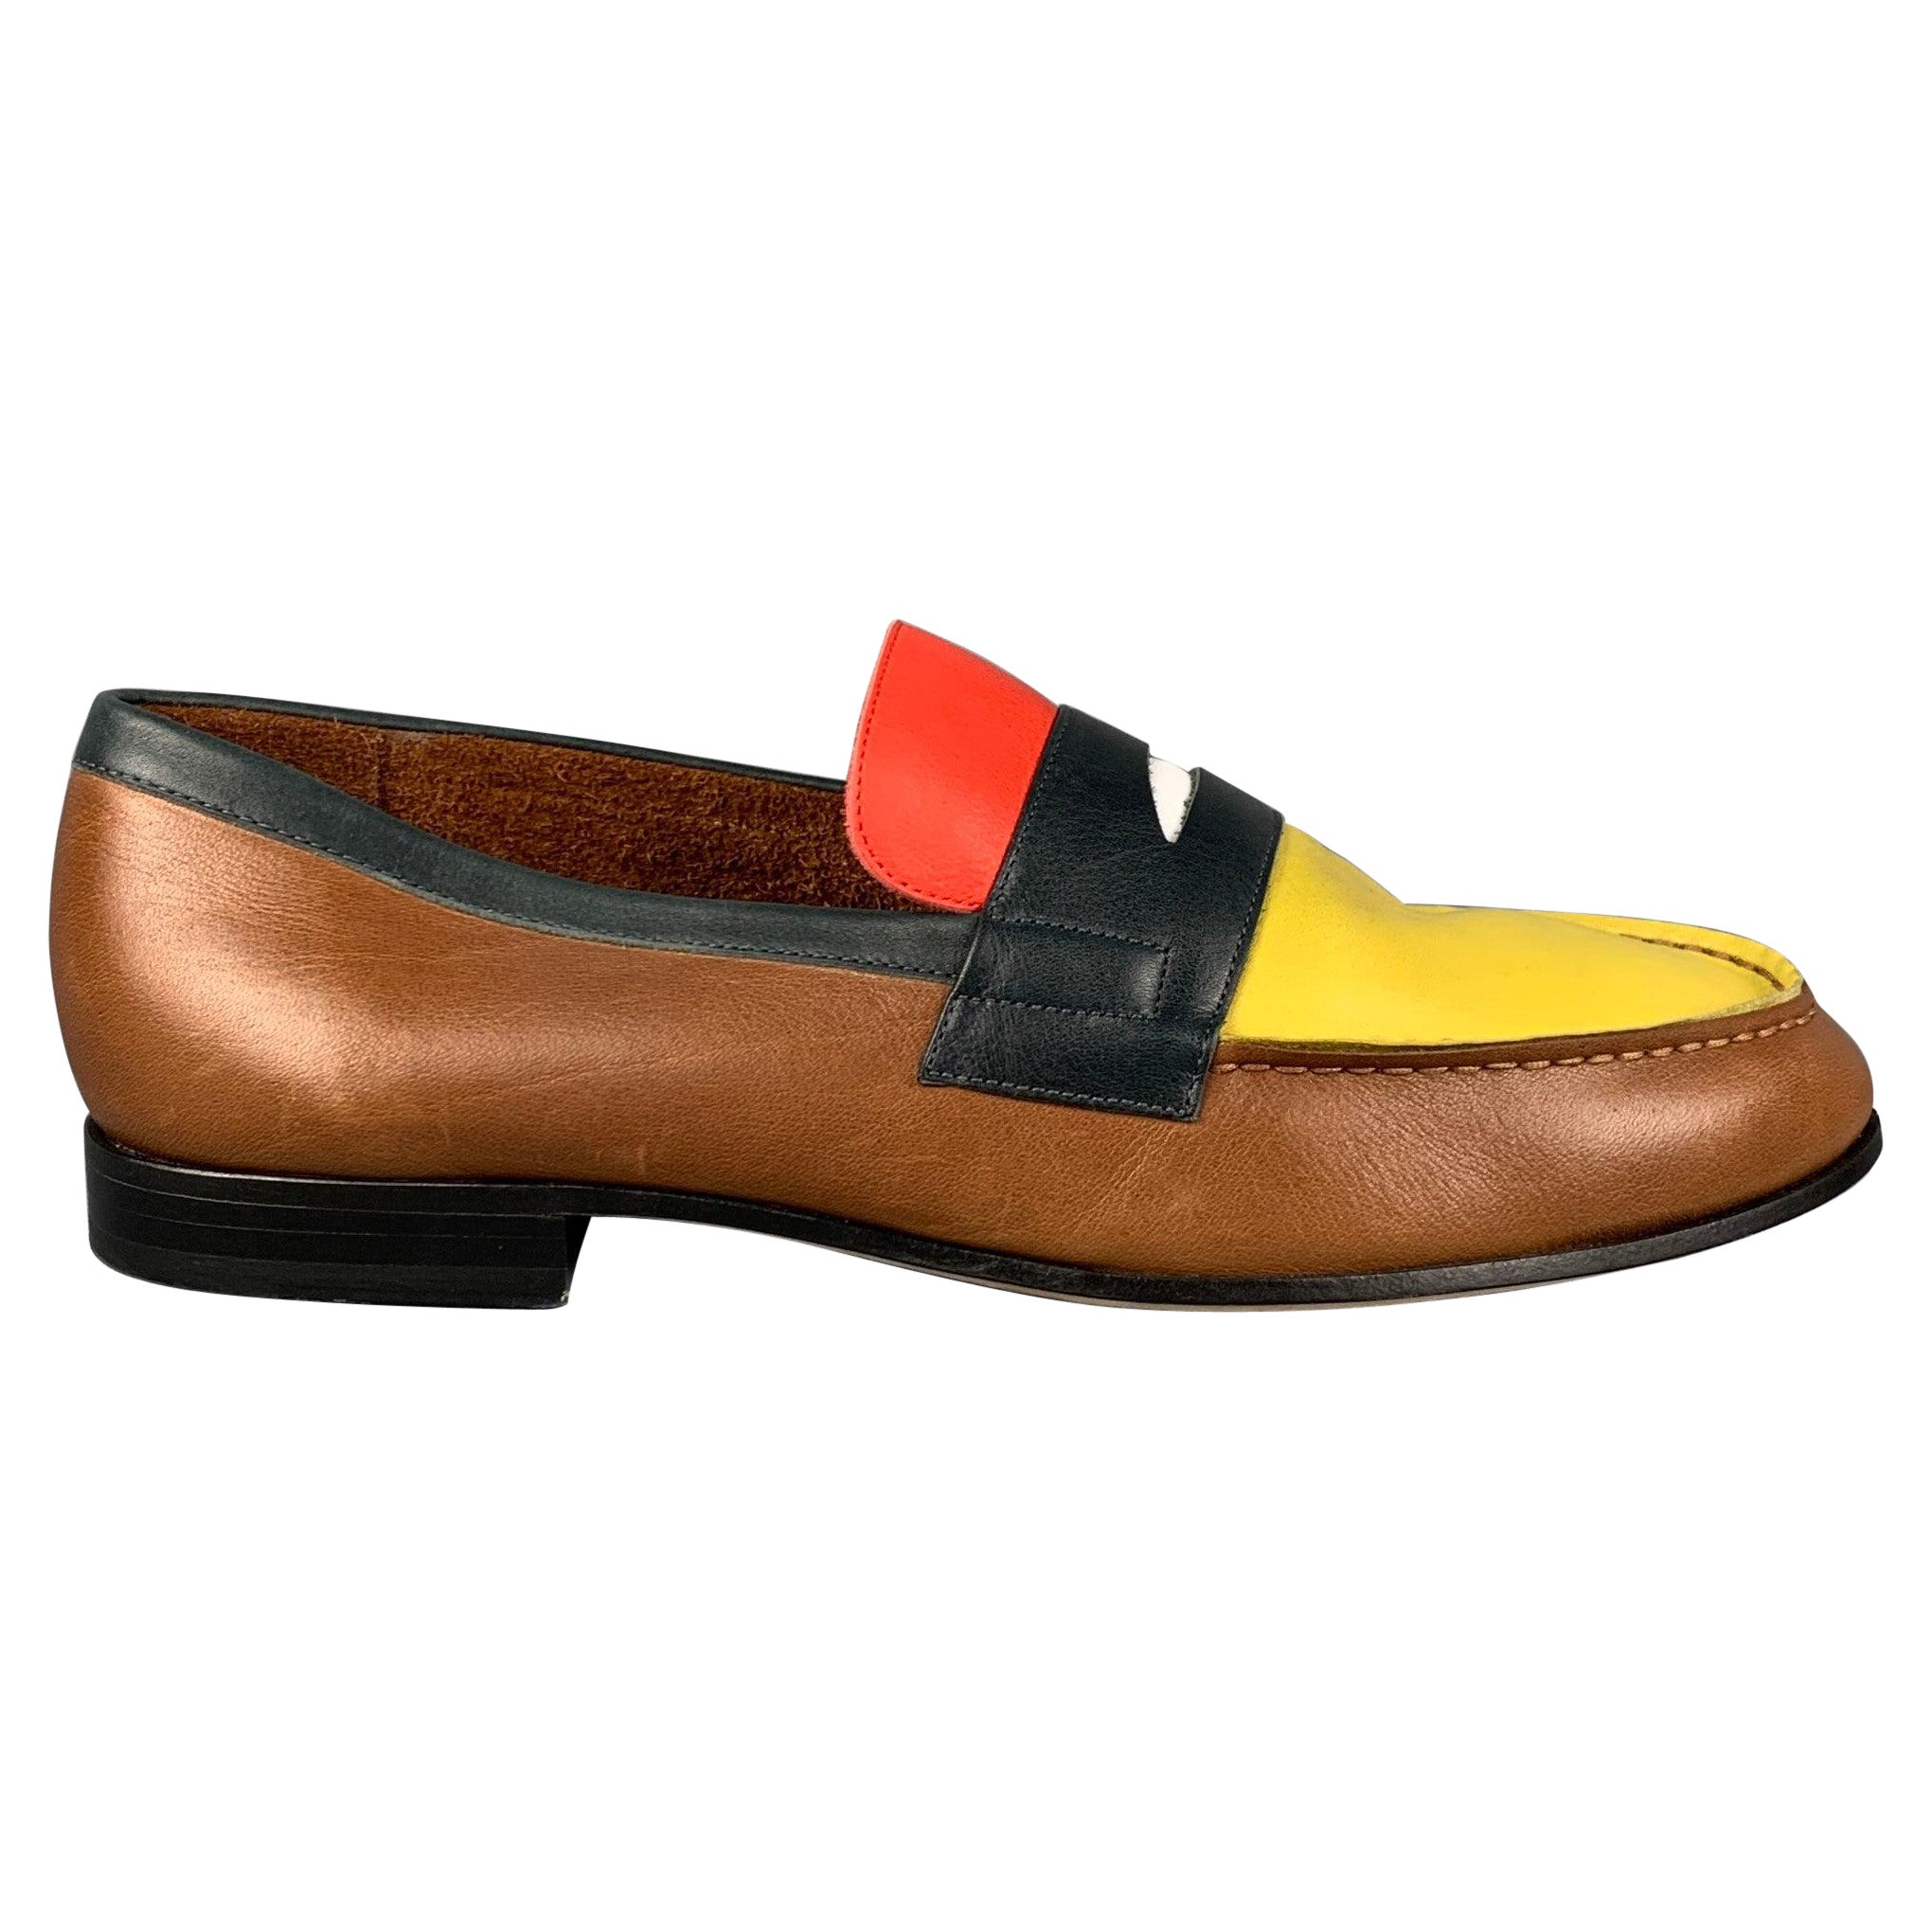 PAUL SMITH Size 10.5 Brown Multi-Color Leather Slip On Loafers For Sale